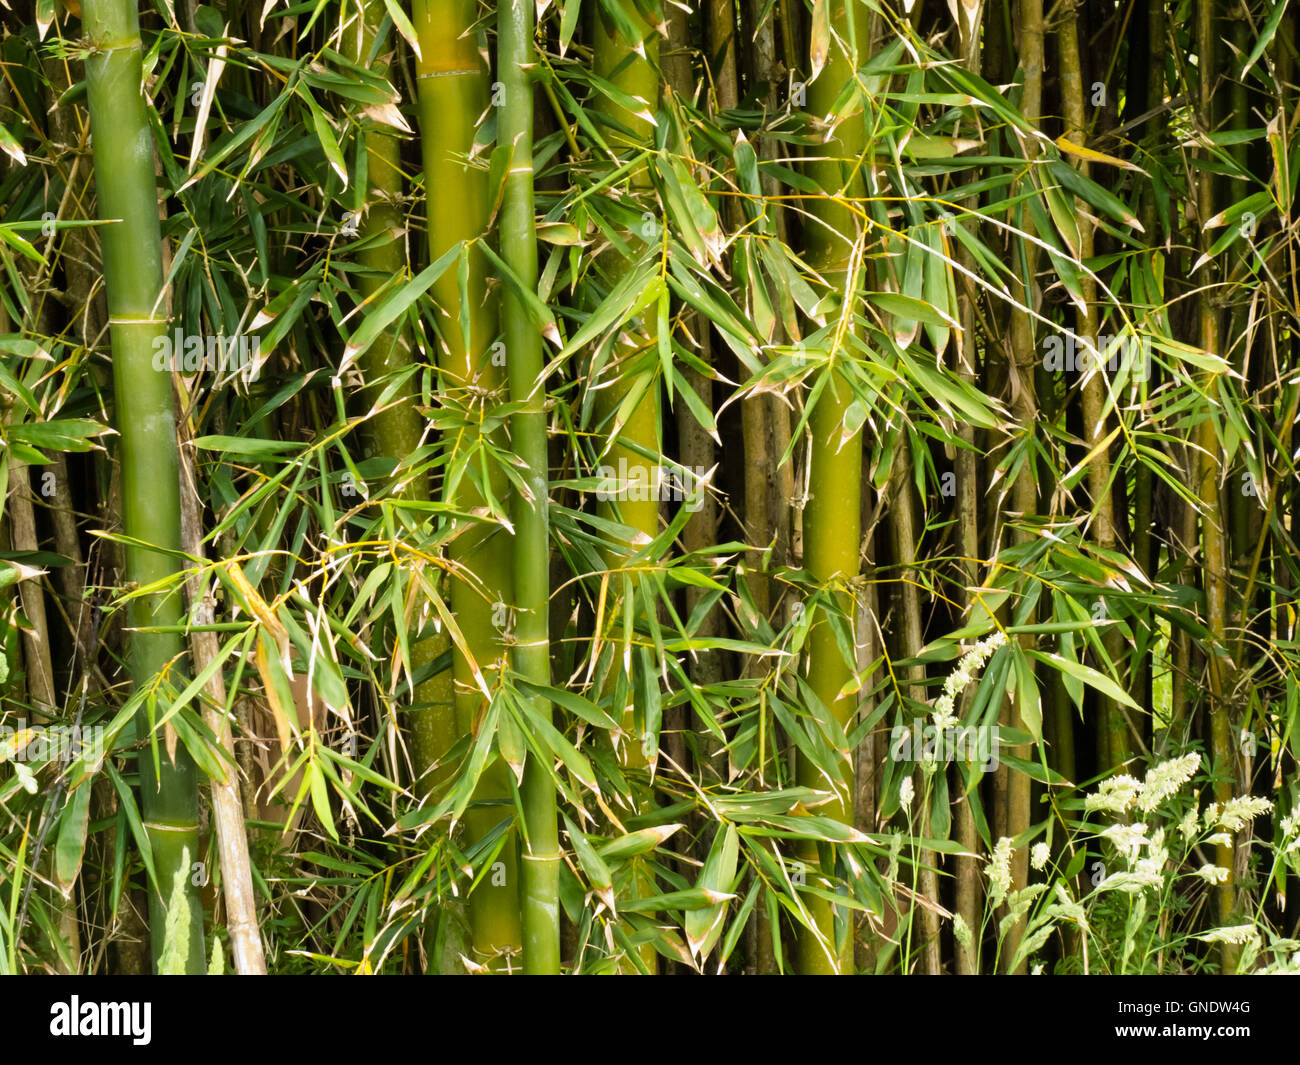 Green bamboo plants background texture pattern Stock Photo